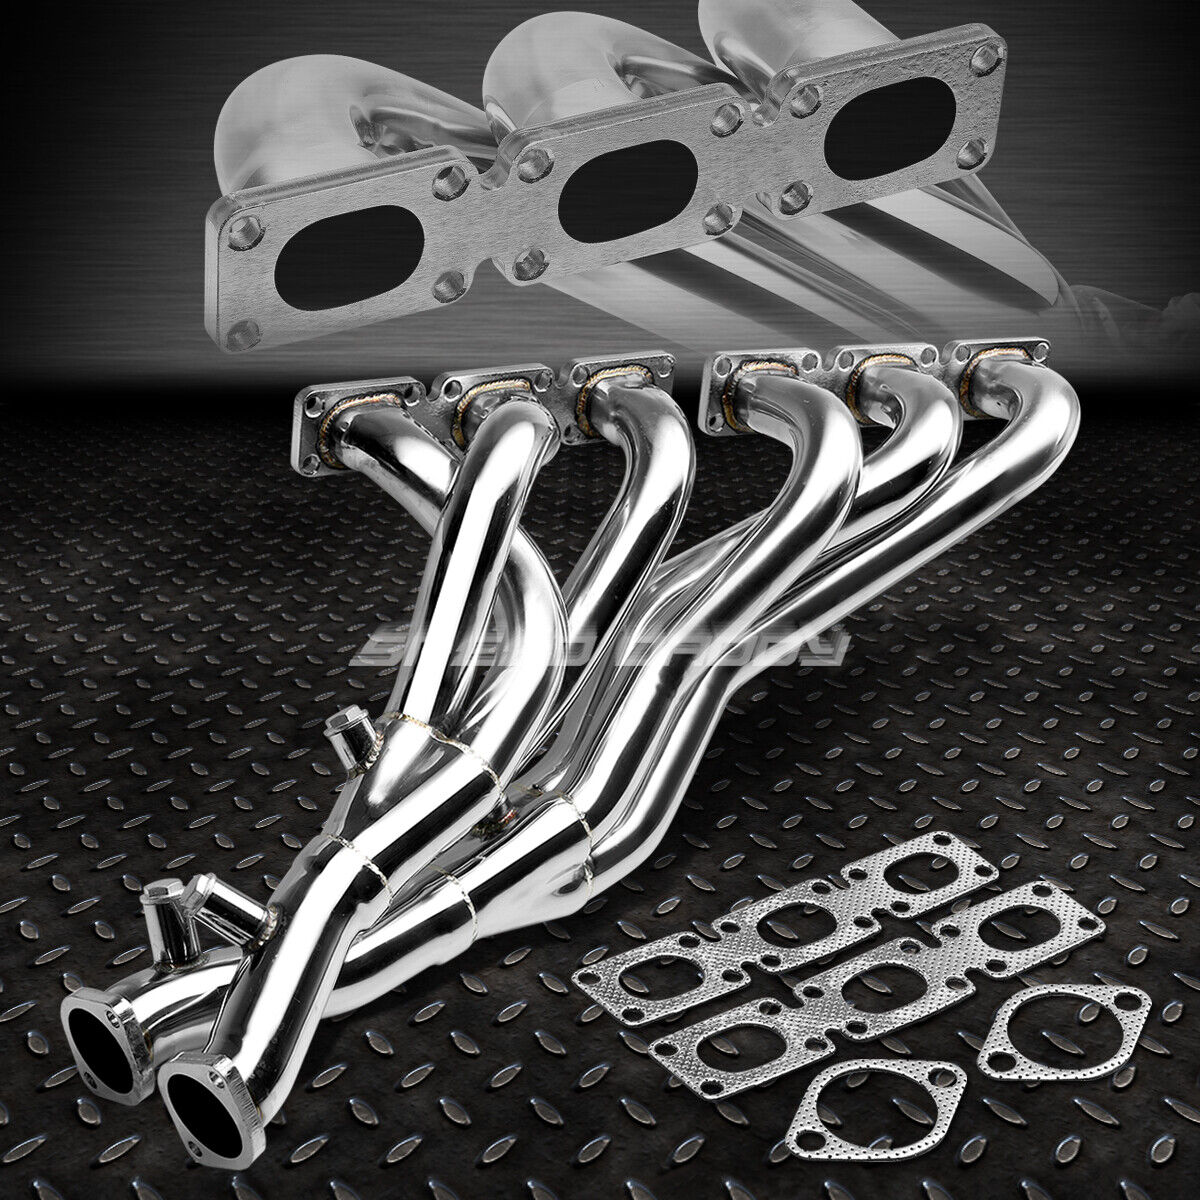 STAINLESS STEEL RACING MANIFOLD HEADER/EXHAUST FOR BMW E46 E39 Z3 M54B25/M54B30